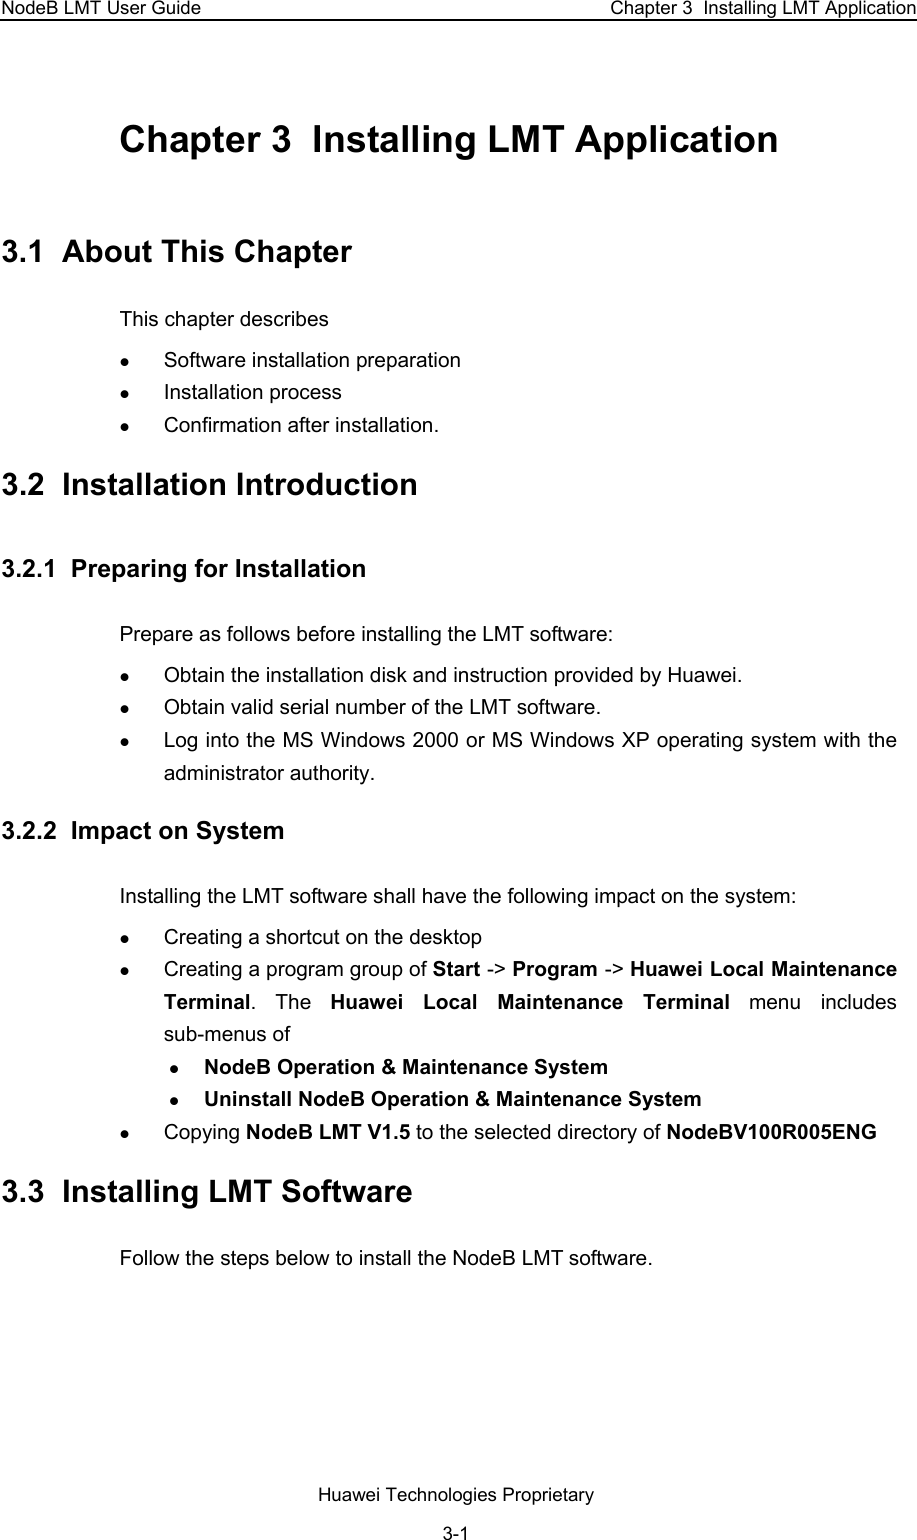 NodeB LMT User Guide  Chapter 3  Installing LMT Application Chapter 3  Installing LMT Application 3.1  About This Chapter This chapter describes  z Software installation preparation z Installation process z Confirmation after installation. 3.2  Installation Introduction 3.2.1  Preparing for Installation Prepare as follows before installing the LMT software:  z Obtain the installation disk and instruction provided by Huawei. z Obtain valid serial number of the LMT software. z Log into the MS Windows 2000 or MS Windows XP operating system with the administrator authority. 3.2.2  Impact on System  Installing the LMT software shall have the following impact on the system:  z Creating a shortcut on the desktop z Creating a program group of Start -&gt; Program -&gt; Huawei Local Maintenance Terminal. The Huawei Local Maintenance Terminal menu includes sub-menus of  z NodeB Operation &amp; Maintenance System z Uninstall NodeB Operation &amp; Maintenance System z Copying NodeB LMT V1.5 to the selected directory of NodeBV100R005ENG 3.3  Installing LMT Software  Follow the steps below to install the NodeB LMT software.  Huawei Technologies Proprietary 3-1 